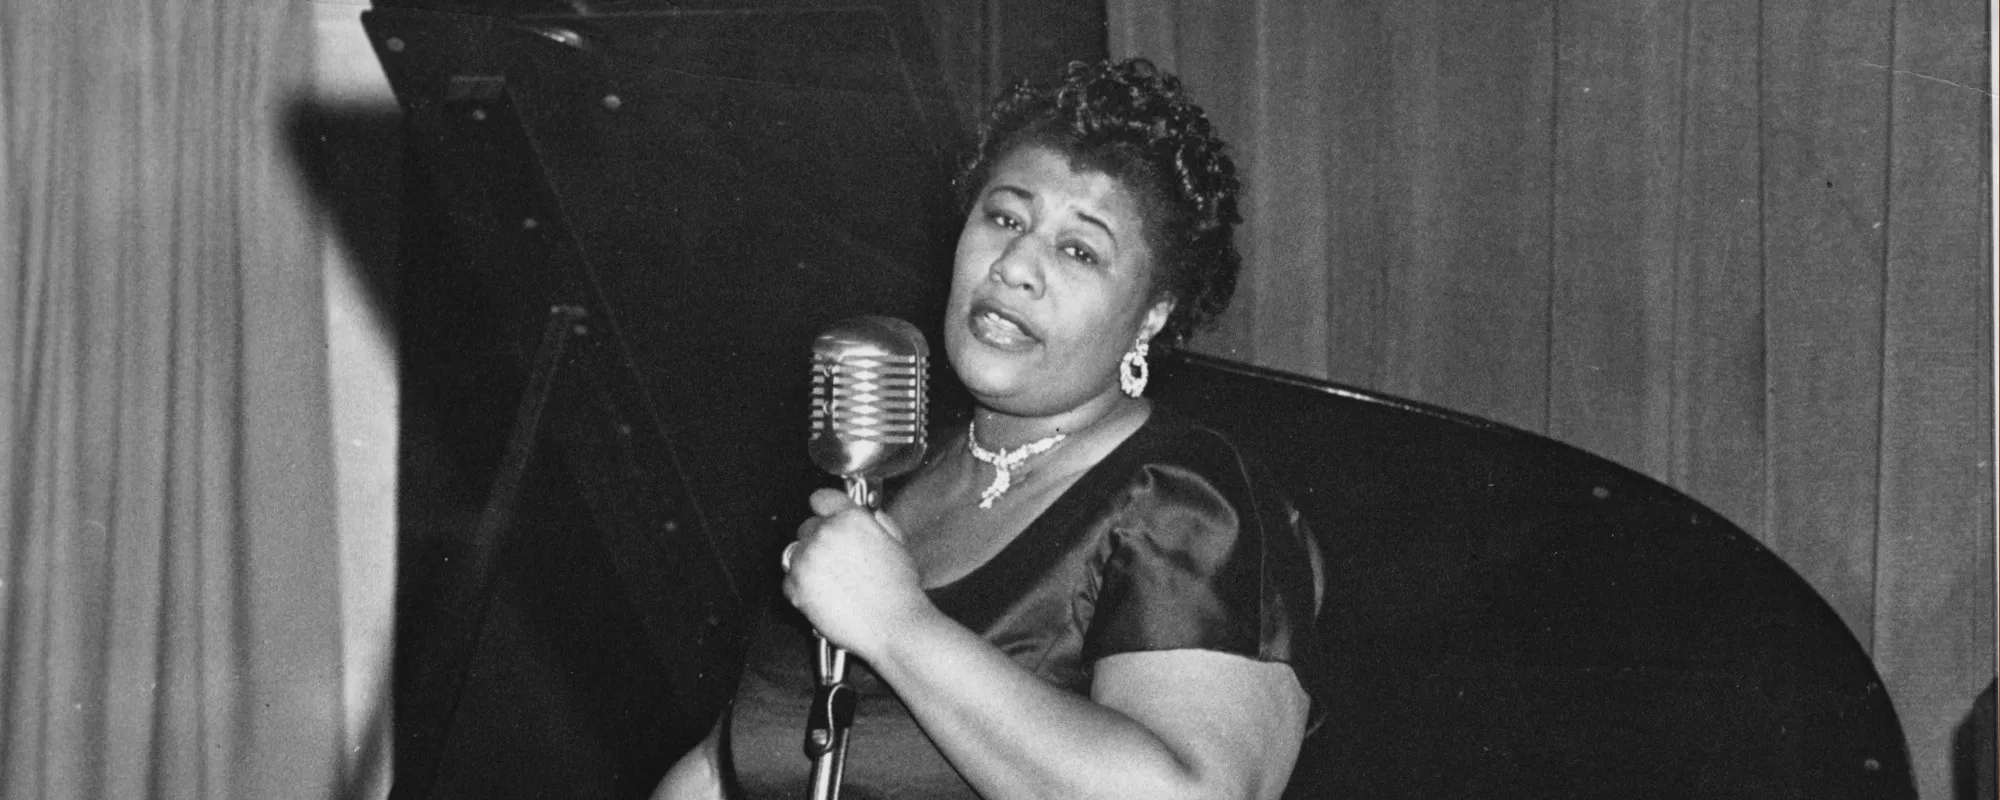 4 of the Most Important Jazz Artists of the 1940s